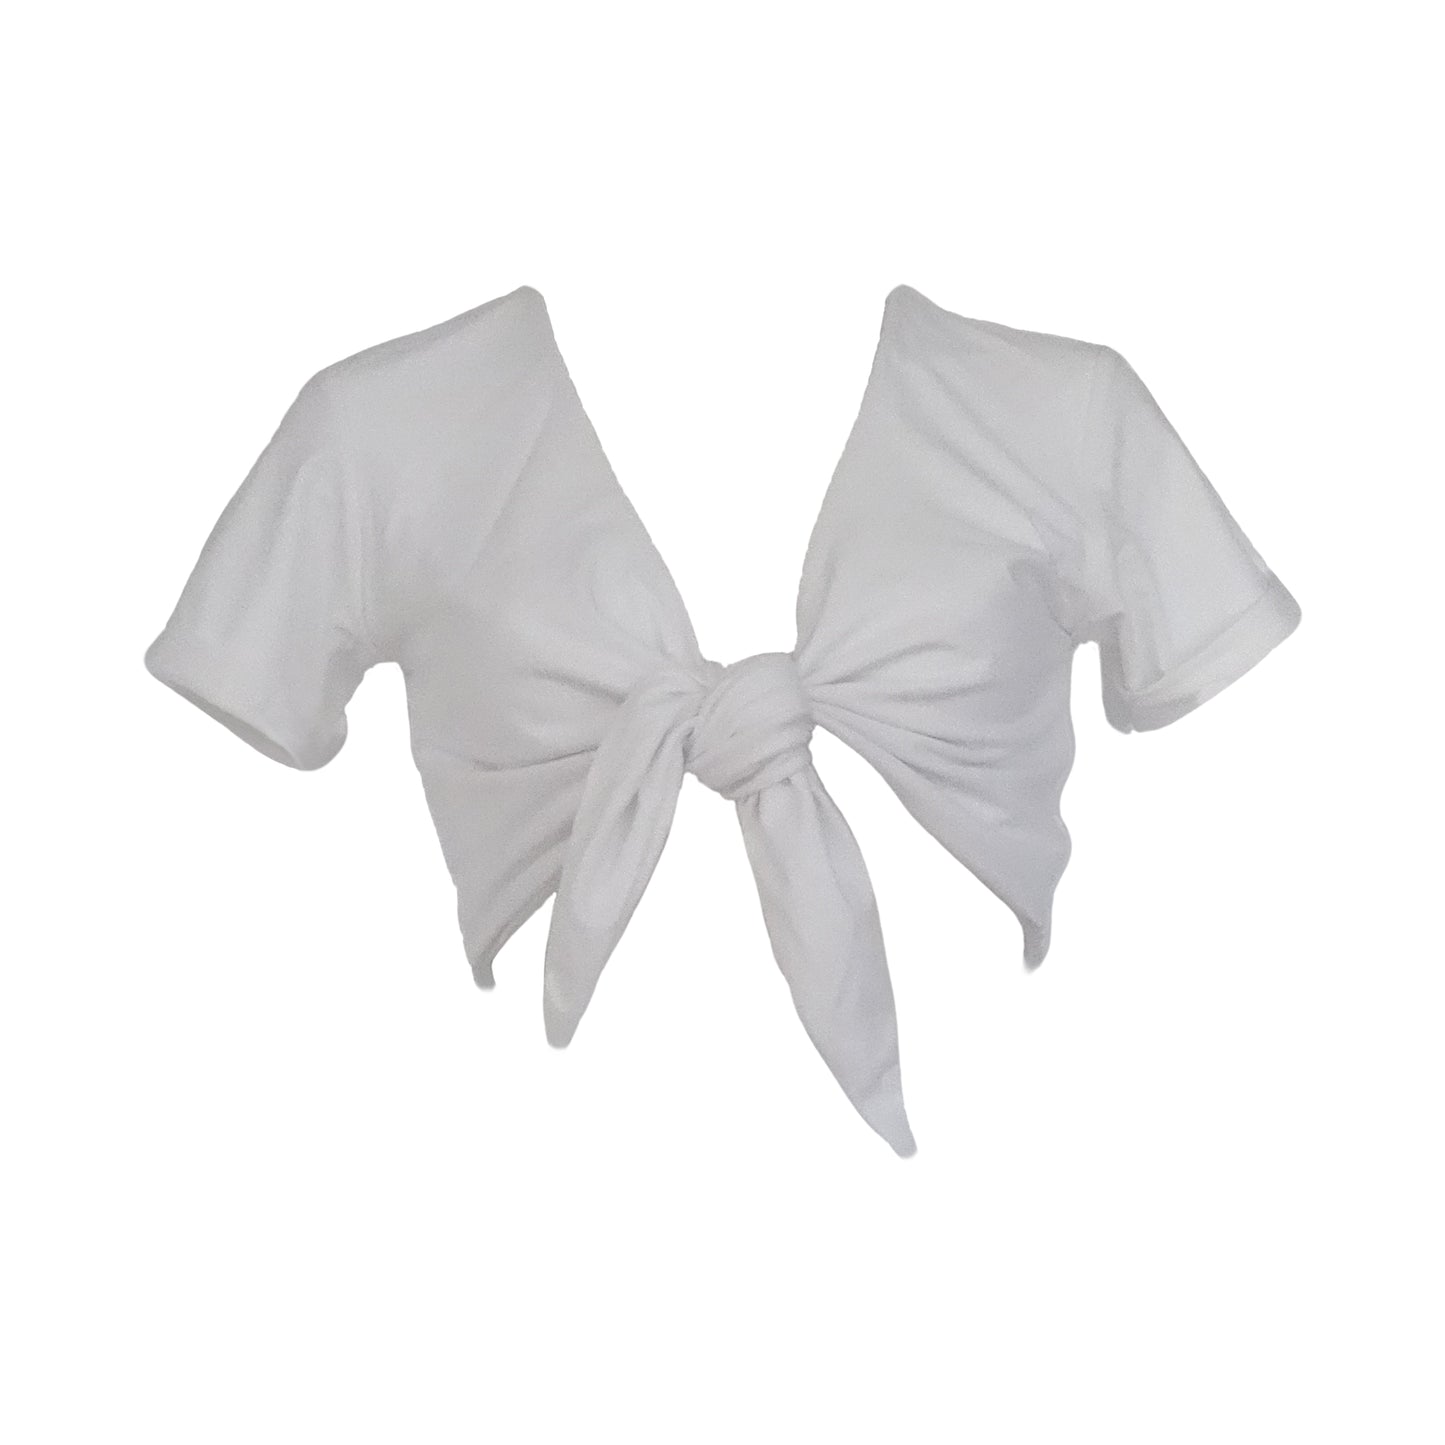 White short sleeve bikini top with adjustable tie front and rolled cuff short sleeves. This bikini top has a plunging neckline illusion and gives versatility to double as a crop top.